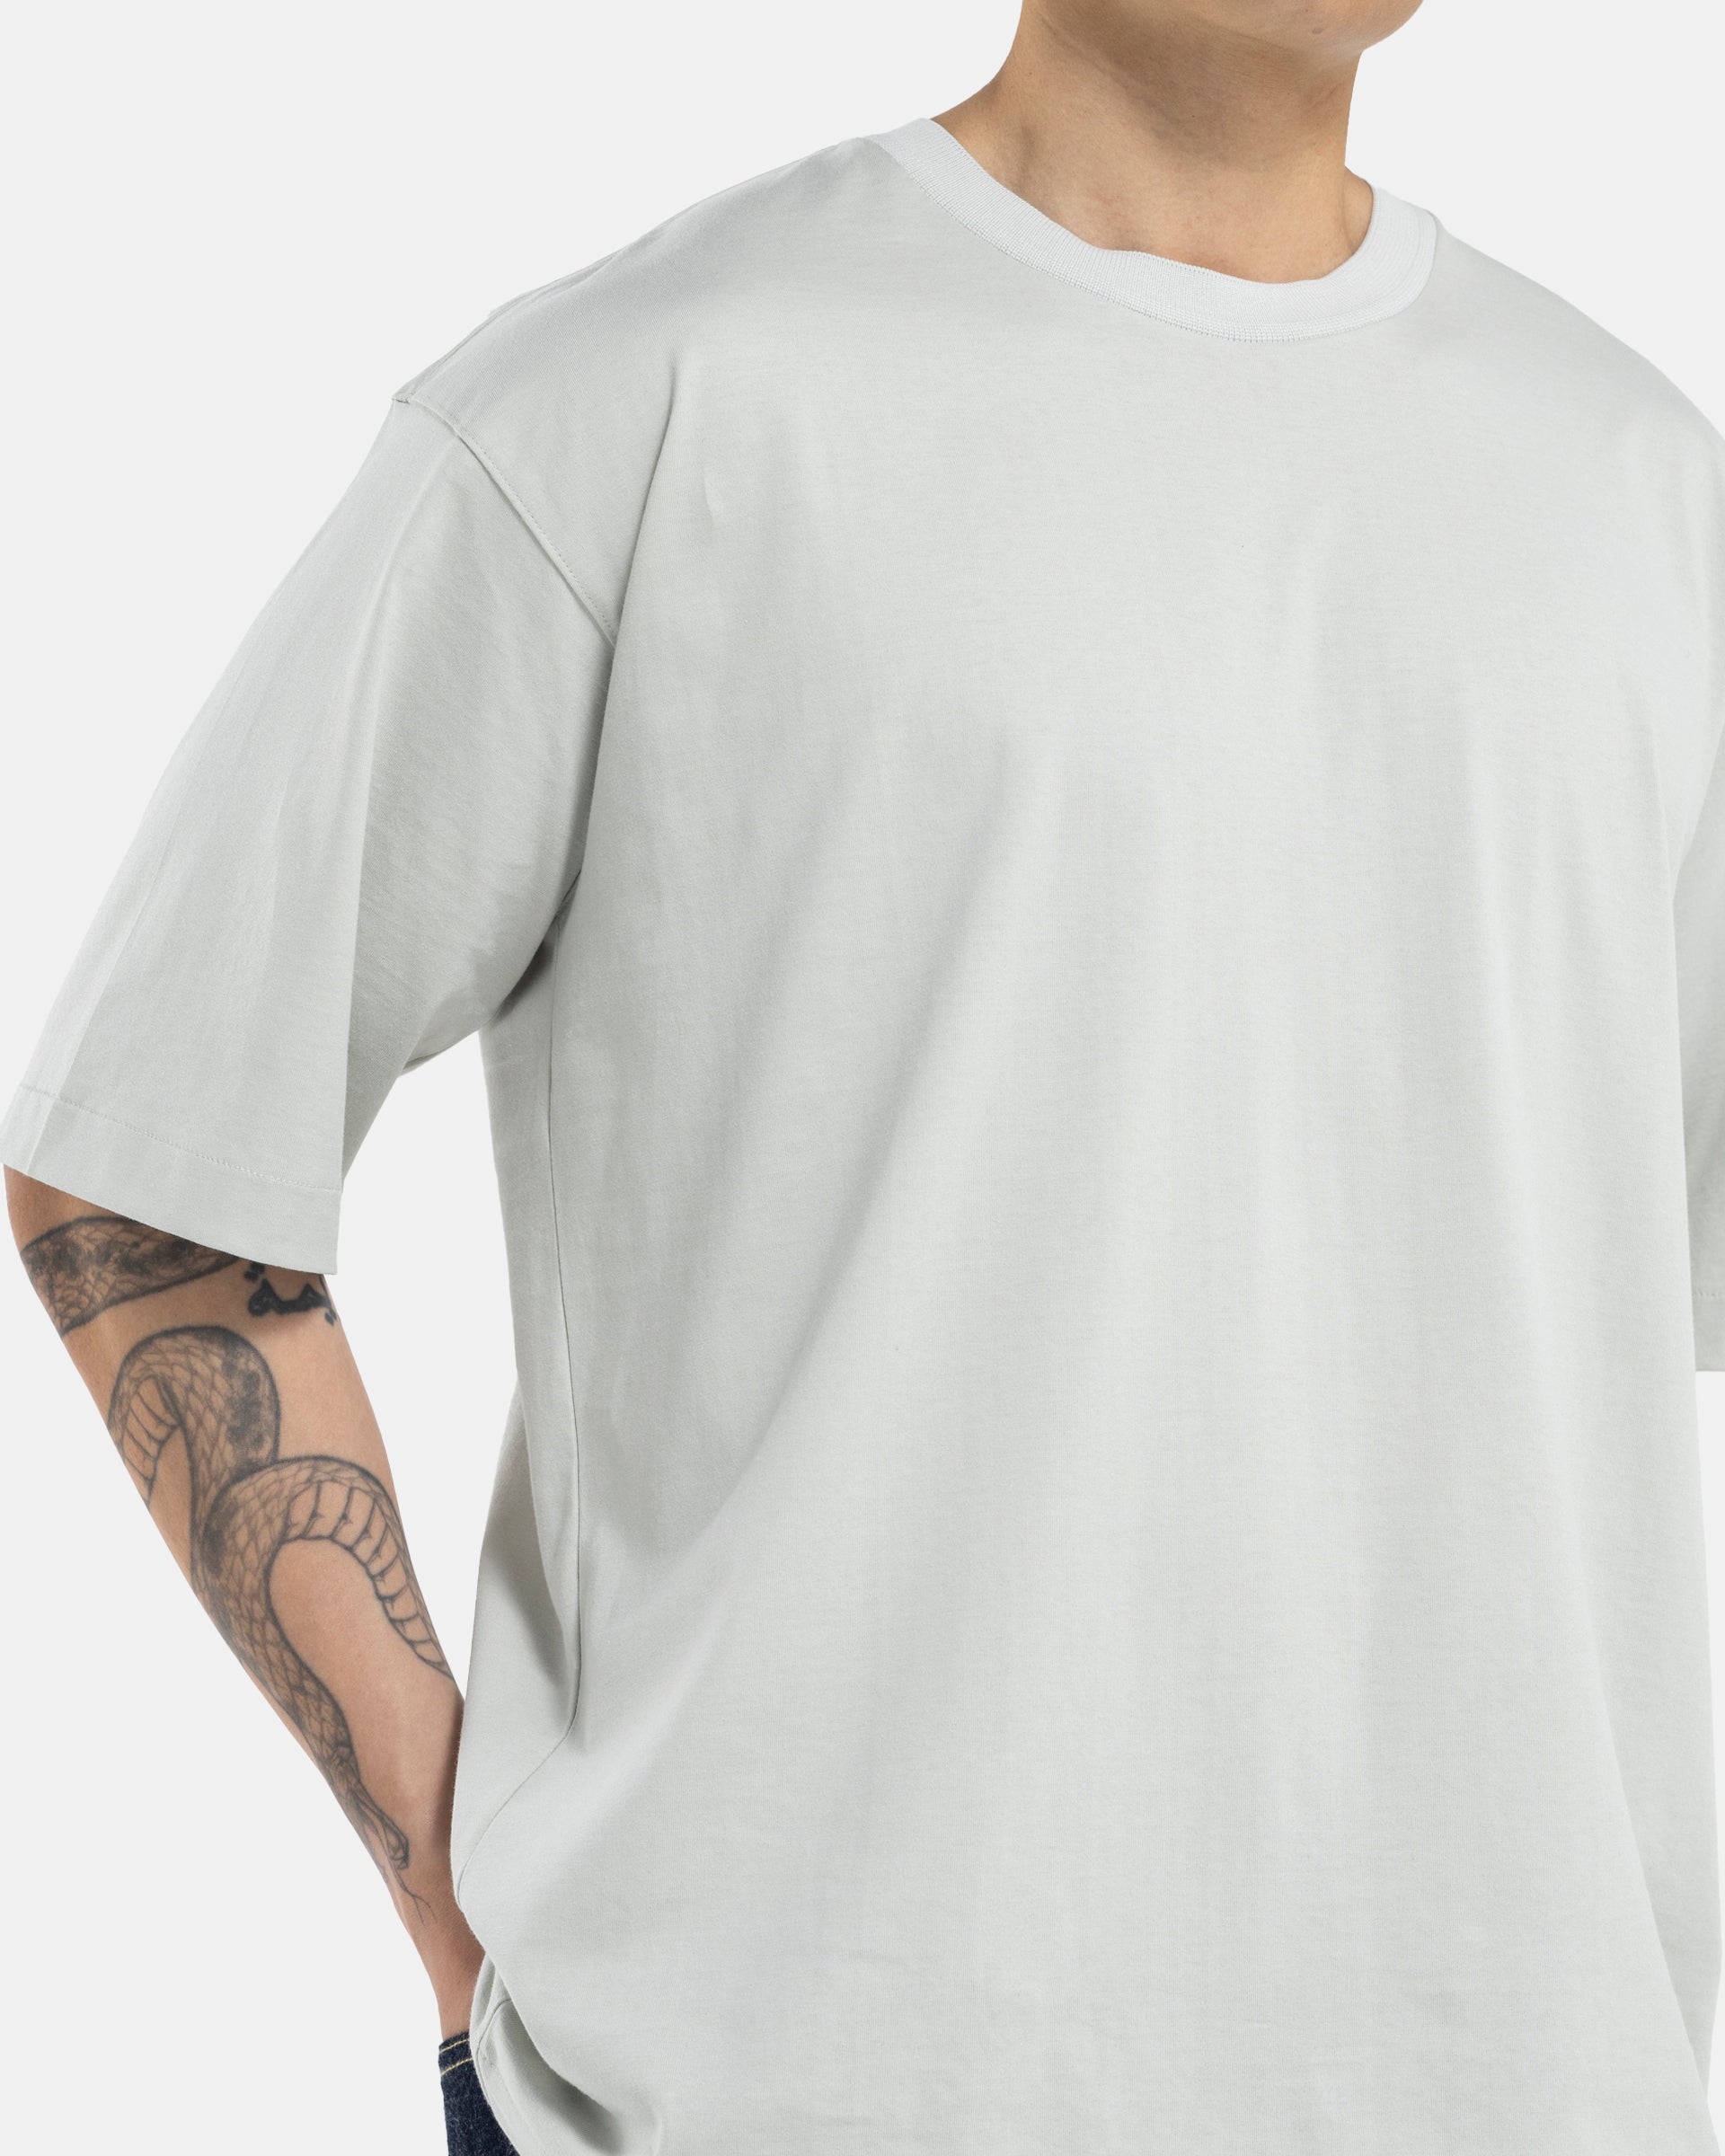 Male model wearing green Still By Hand T-shirt on white background